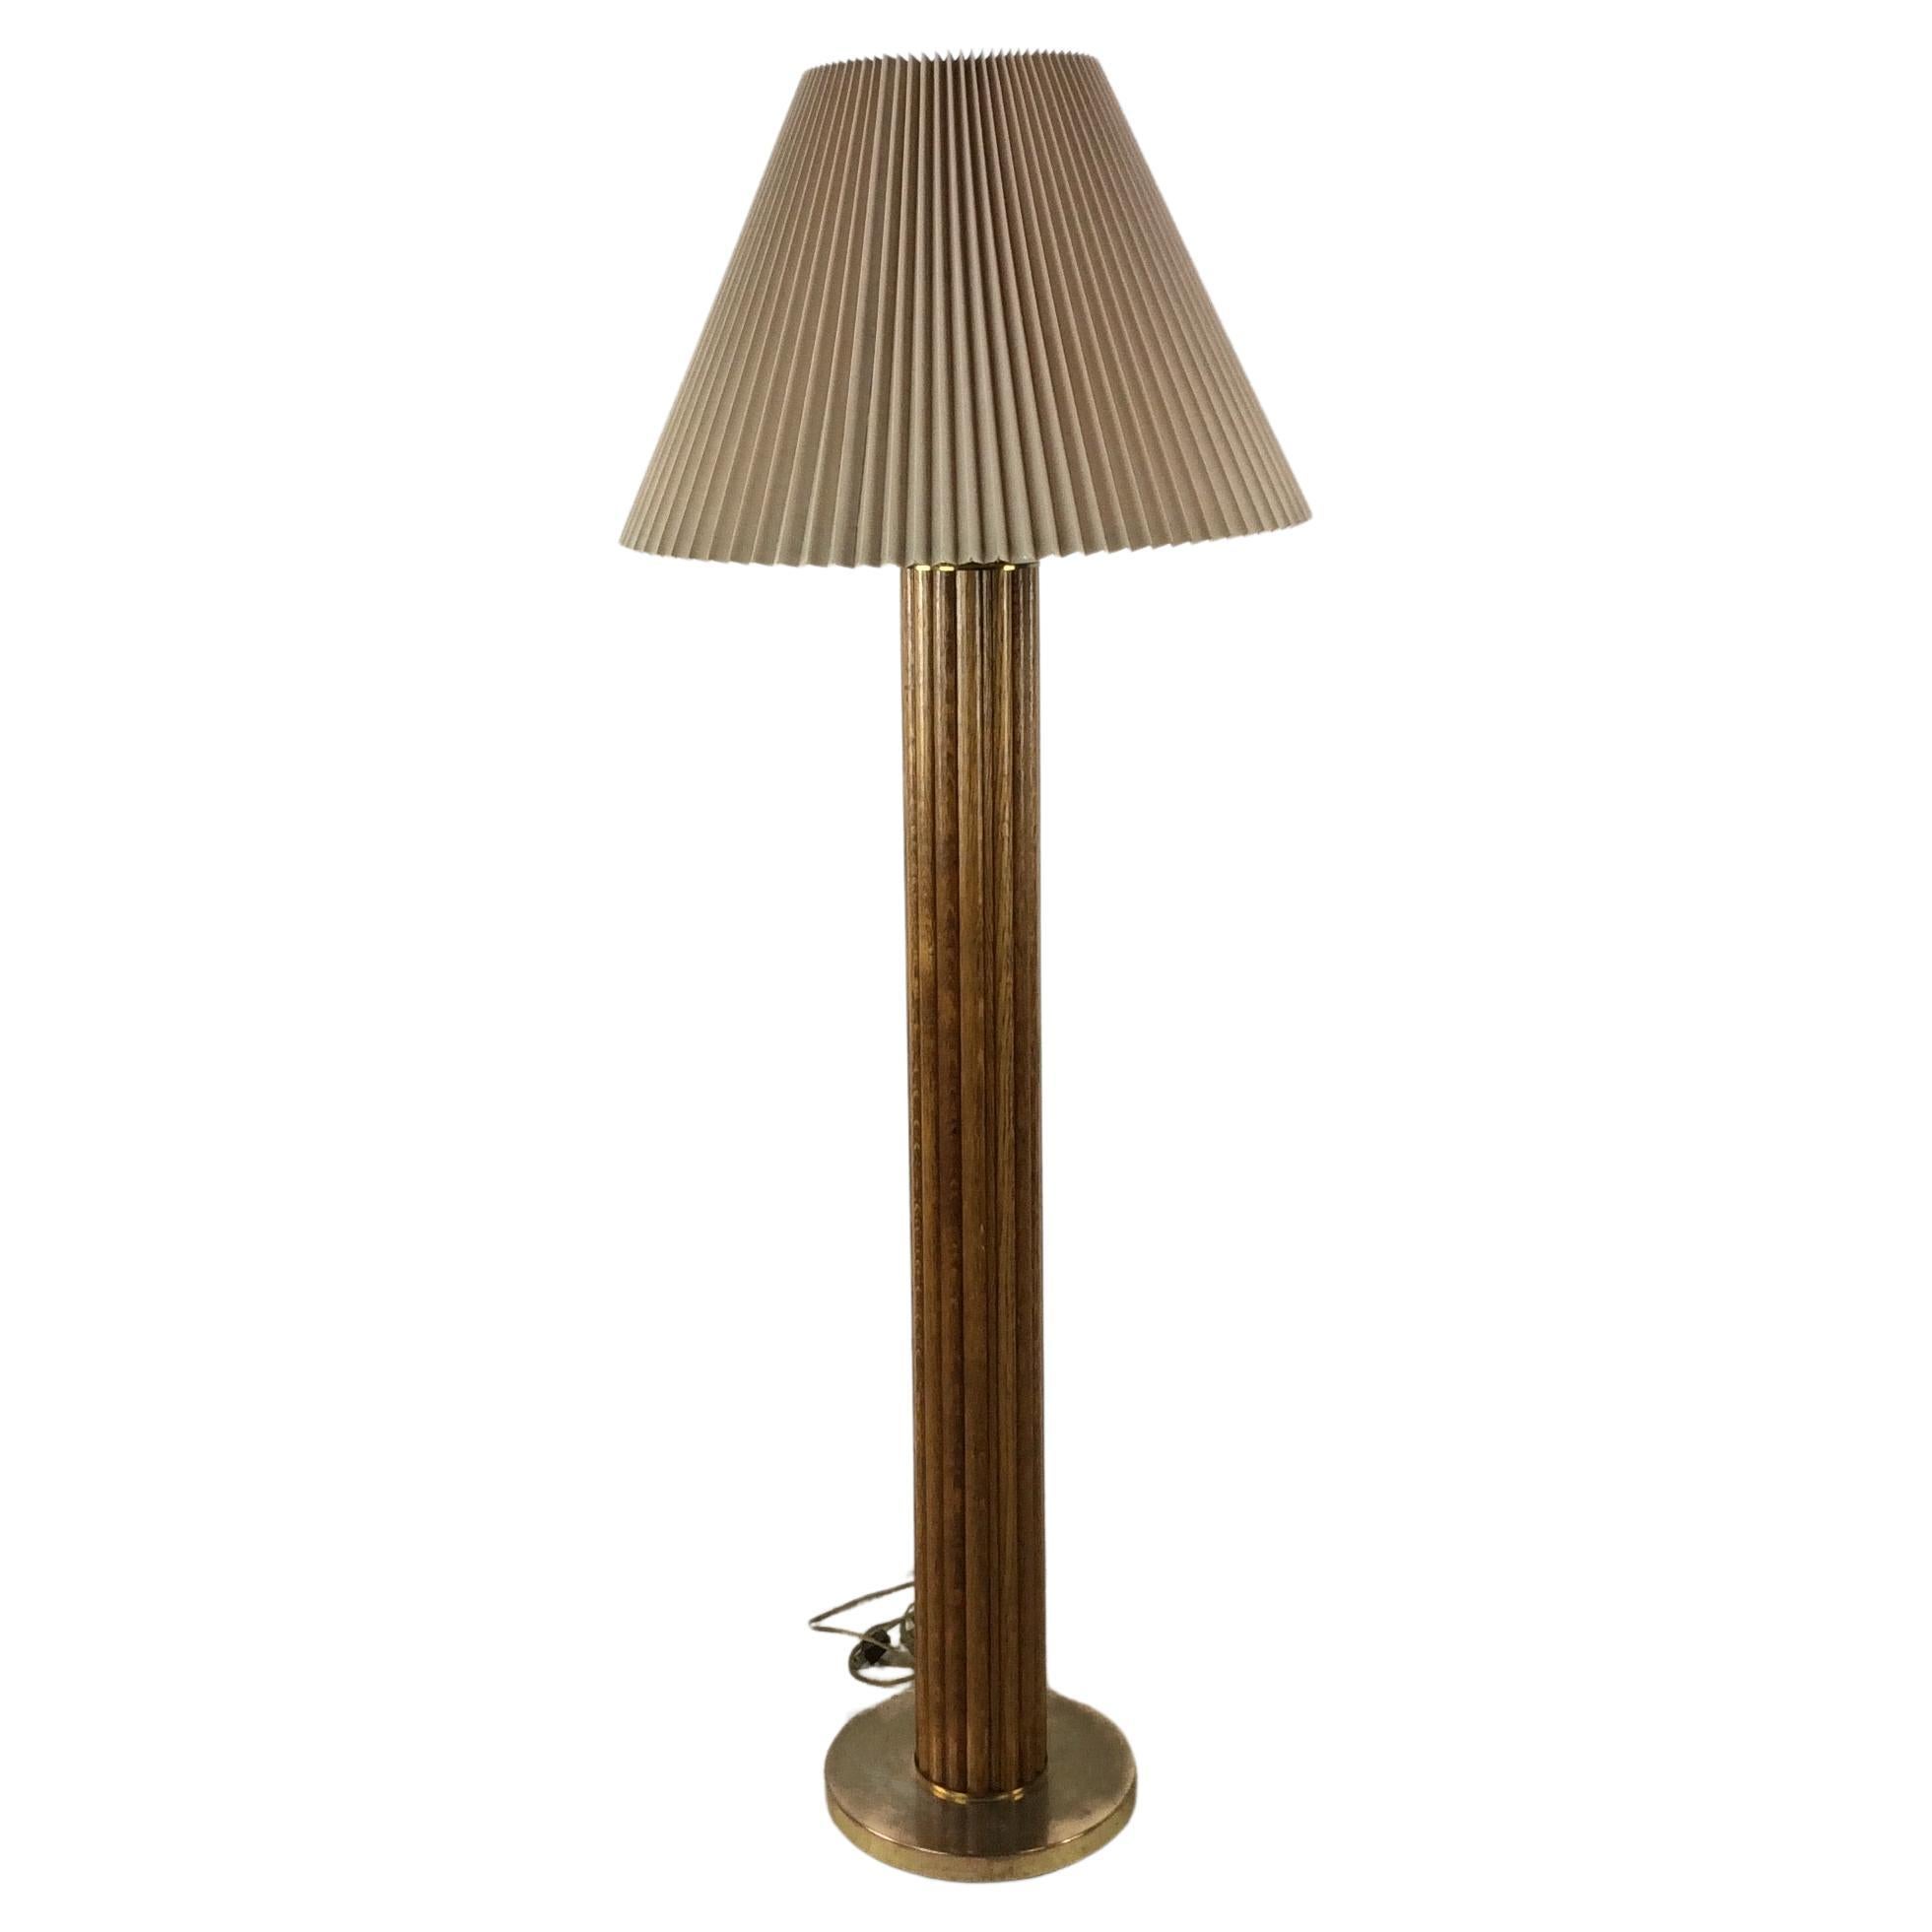 Vintage Boho Chic Rattan Floor Lamp with Pleated Shade For Sale